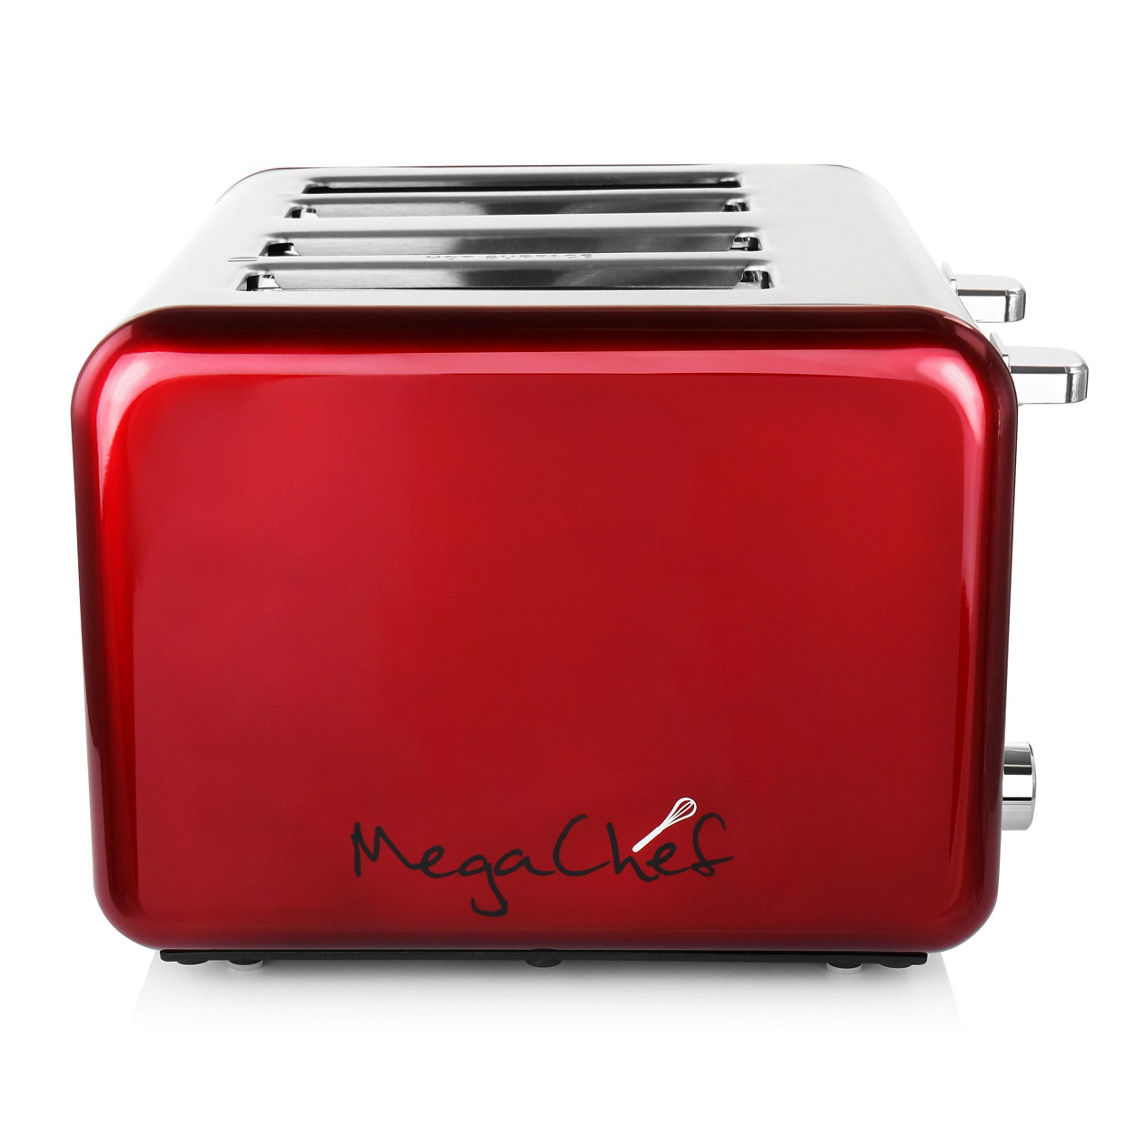 MegaChef 4 Slice Toaster in Stainless Steel Red - Image 4 of 5